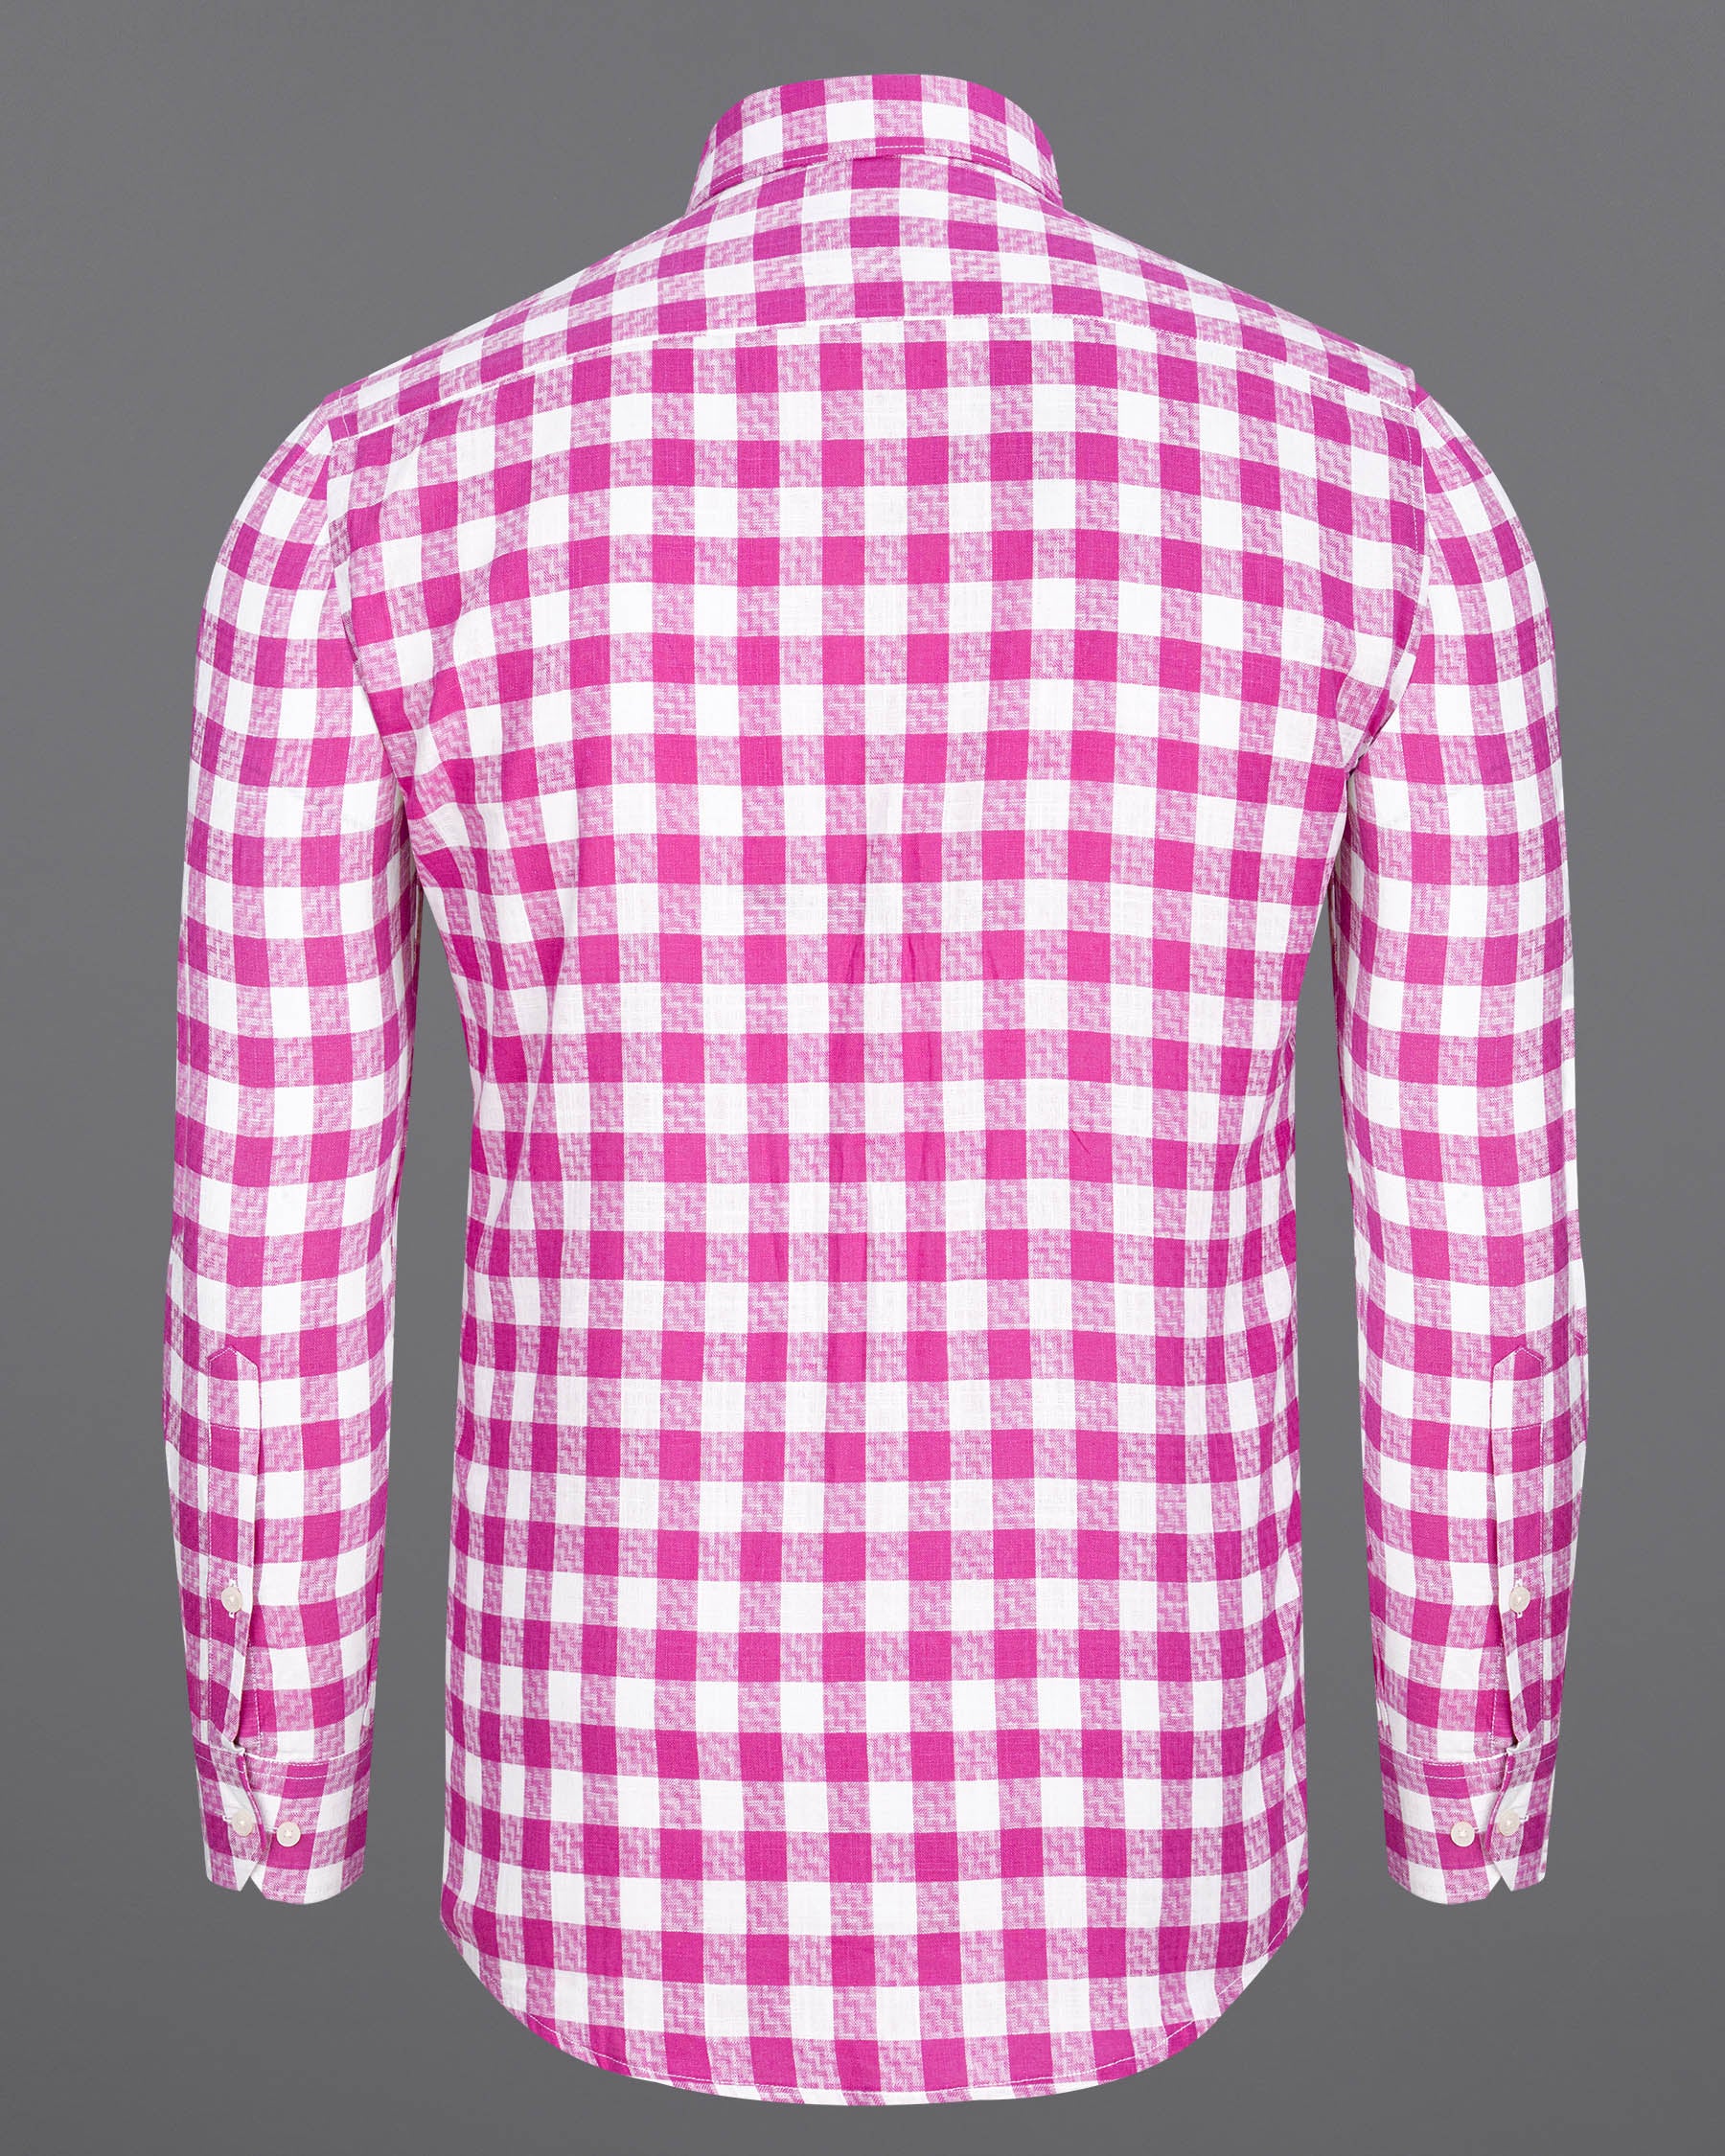 Bright White and Cerise Pink Plaid Twill Premium Cotton Shirt 6927-BD-38,6927-BD-38,6927-BD-39,6927-BD-39,6927-BD-40,6927-BD-40,6927-BD-42,6927-BD-42,6927-BD-44,6927-BD-44,6927-BD-46,6927-BD-46,6927-BD-48,6927-BD-48,6927-BD-50,6927-BD-50,6927-BD-52,6927-BD-52